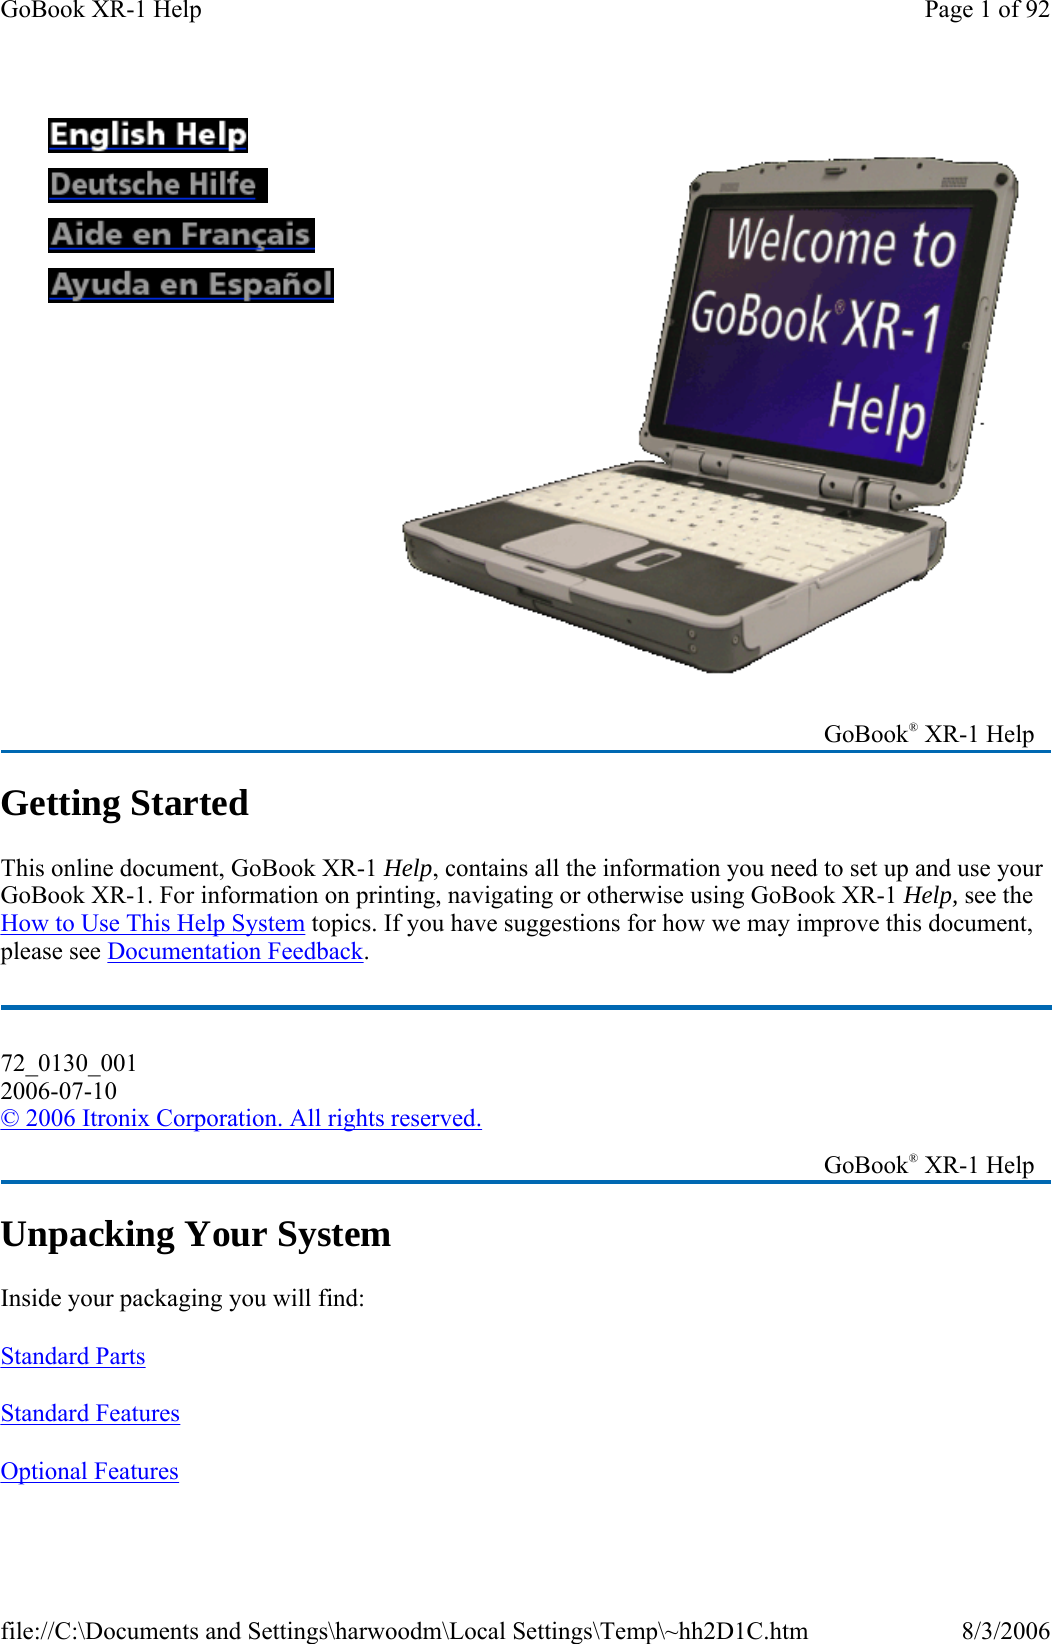 Getting Started This online document, GoBook XR-1 Help, contains all the information you need to set up and use your GoBook XR-1. For information on printing, navigating or otherwise using GoBook XR-1 Help, see the How to Use This Help System topics. If you have suggestions for how we may improve this document, please see Documentation Feedback. Unpacking Your System Inside your packaging you will find: Standard Parts  Standard Features  Optional Features                      GoBook® XR-1 Help 72_0130_001 2006-07-10 © 2006 Itronix Corporation. All rights reserved.   GoBook® XR-1 Help Page 1 of 92GoBook XR-1 Help8/3/2006file://C:\Documents and Settings\harwoodm\Local Settings\Temp\~hh2D1C.htm